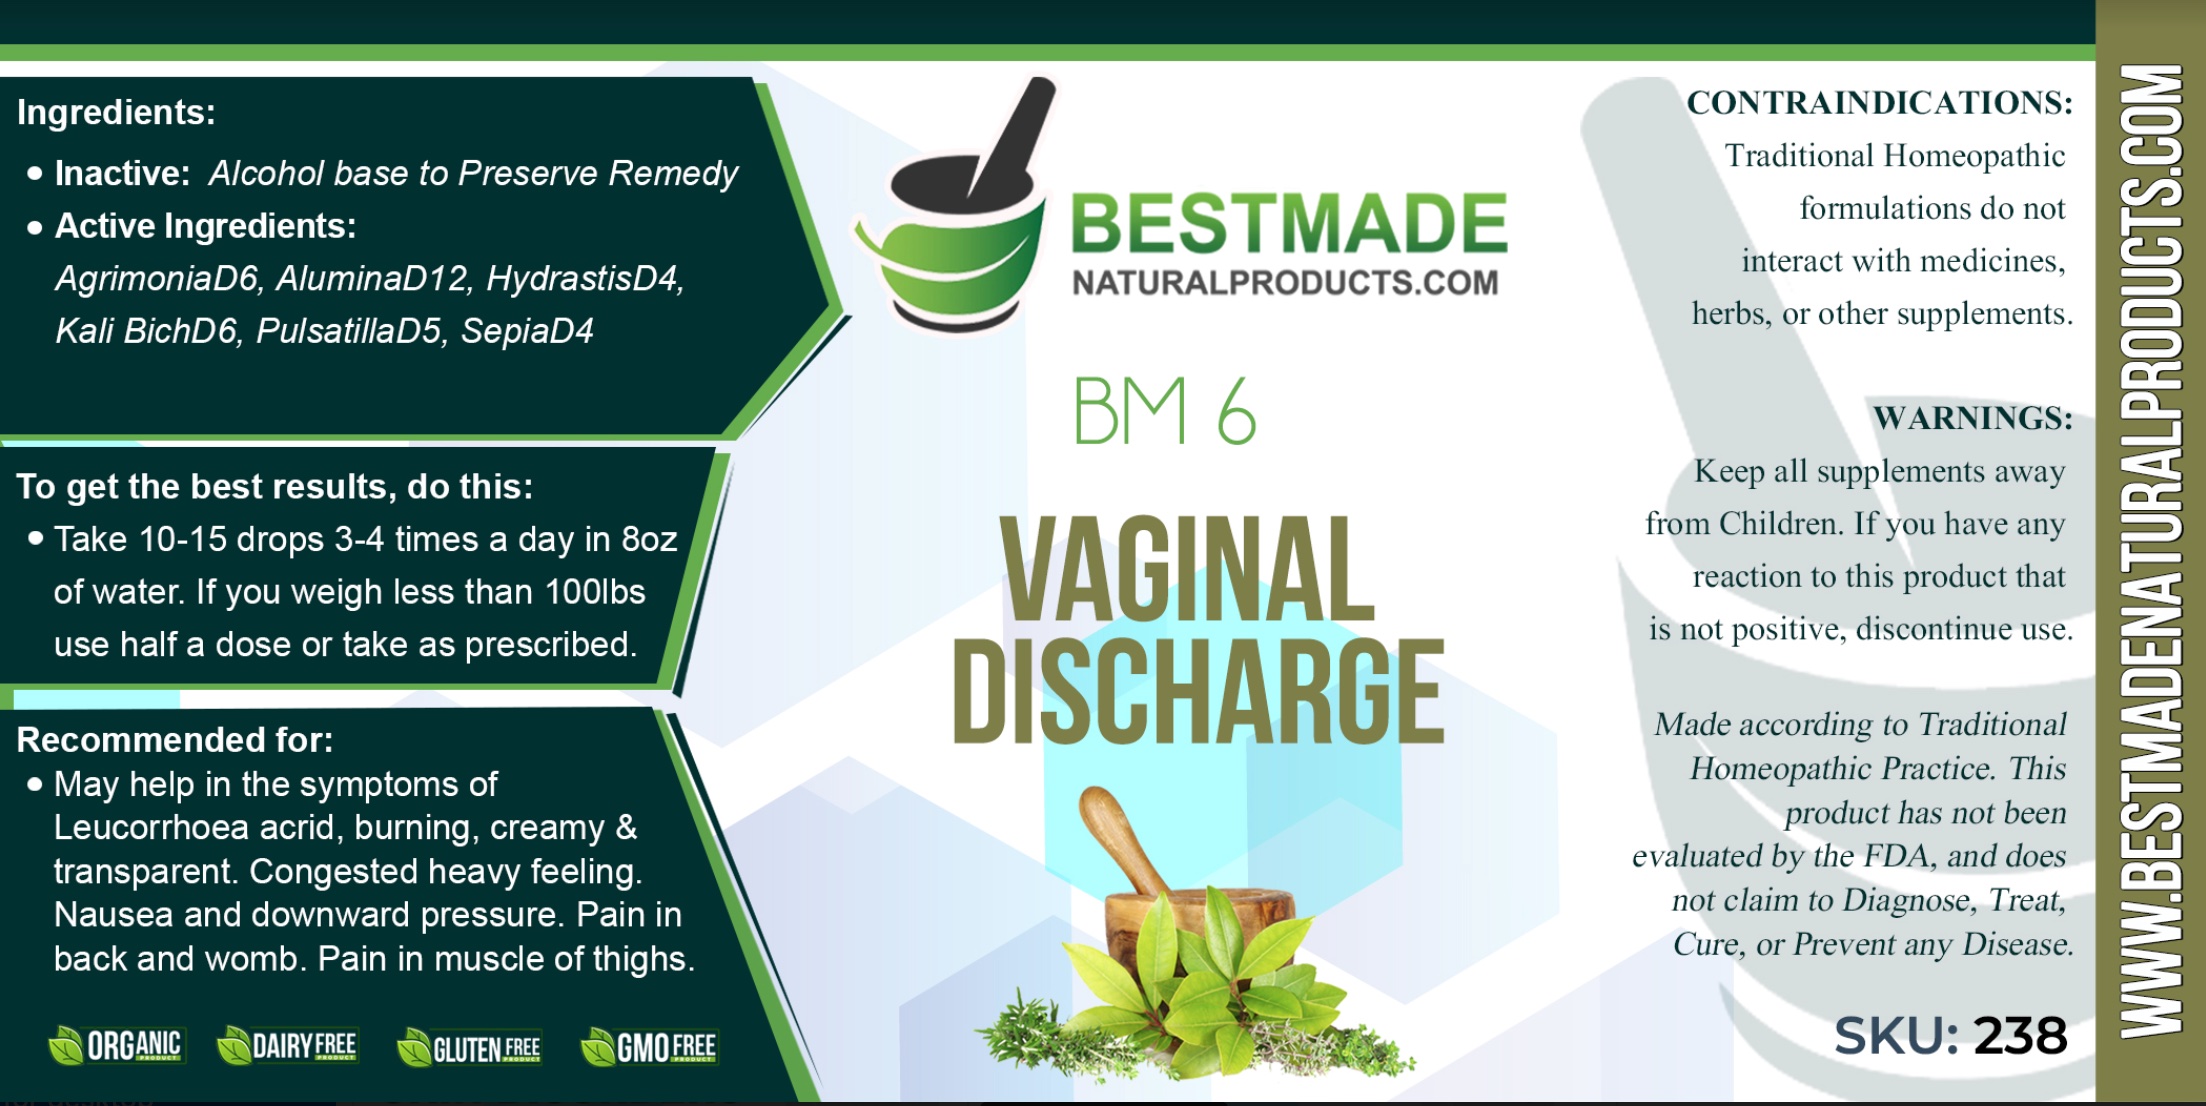 BM6 dosage and administration